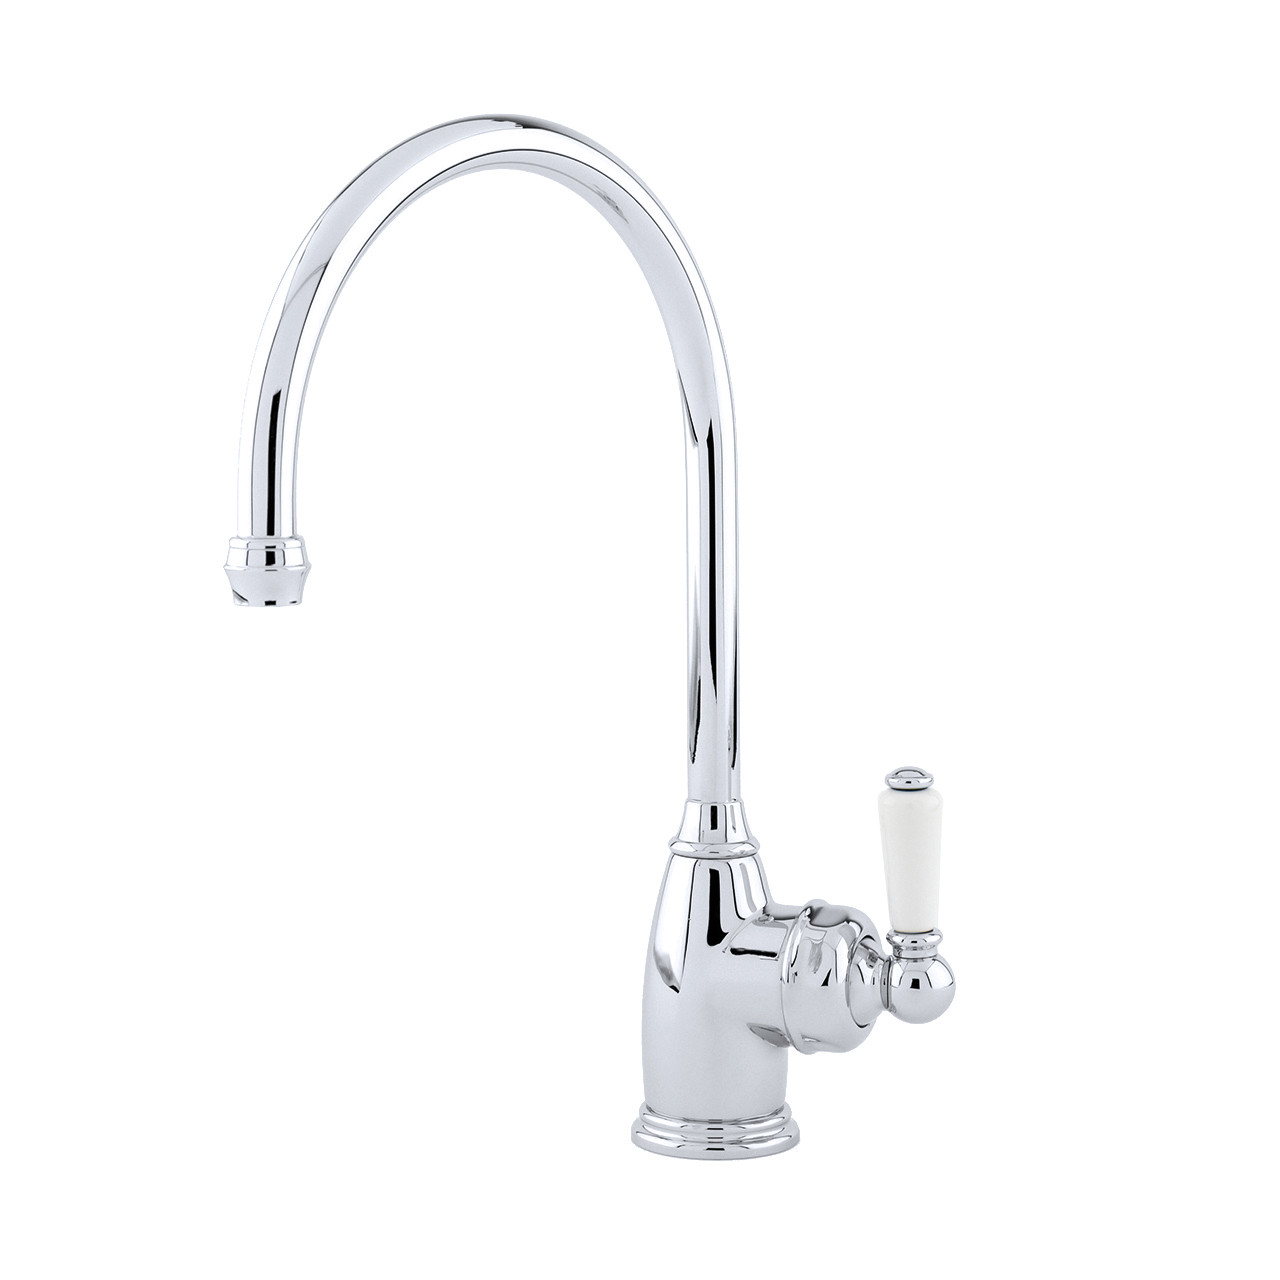 An image of Perrin & Rowe Parthian 4341 Kitchen Tap